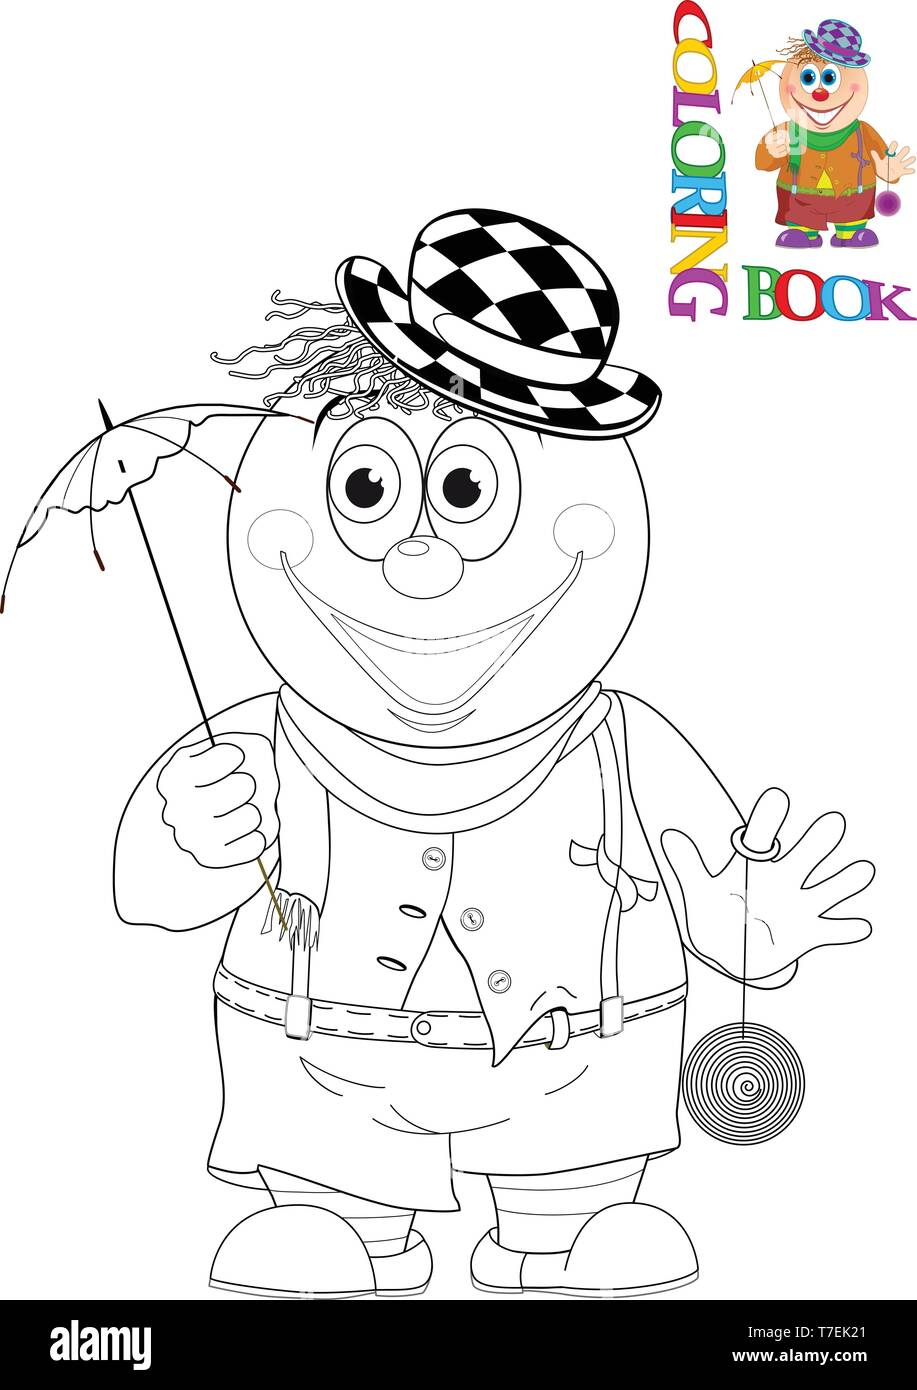 The illustration shows a funny cartoon clown with a umbrella in hand . Is made a black outline for a coloring book. Stock Vector